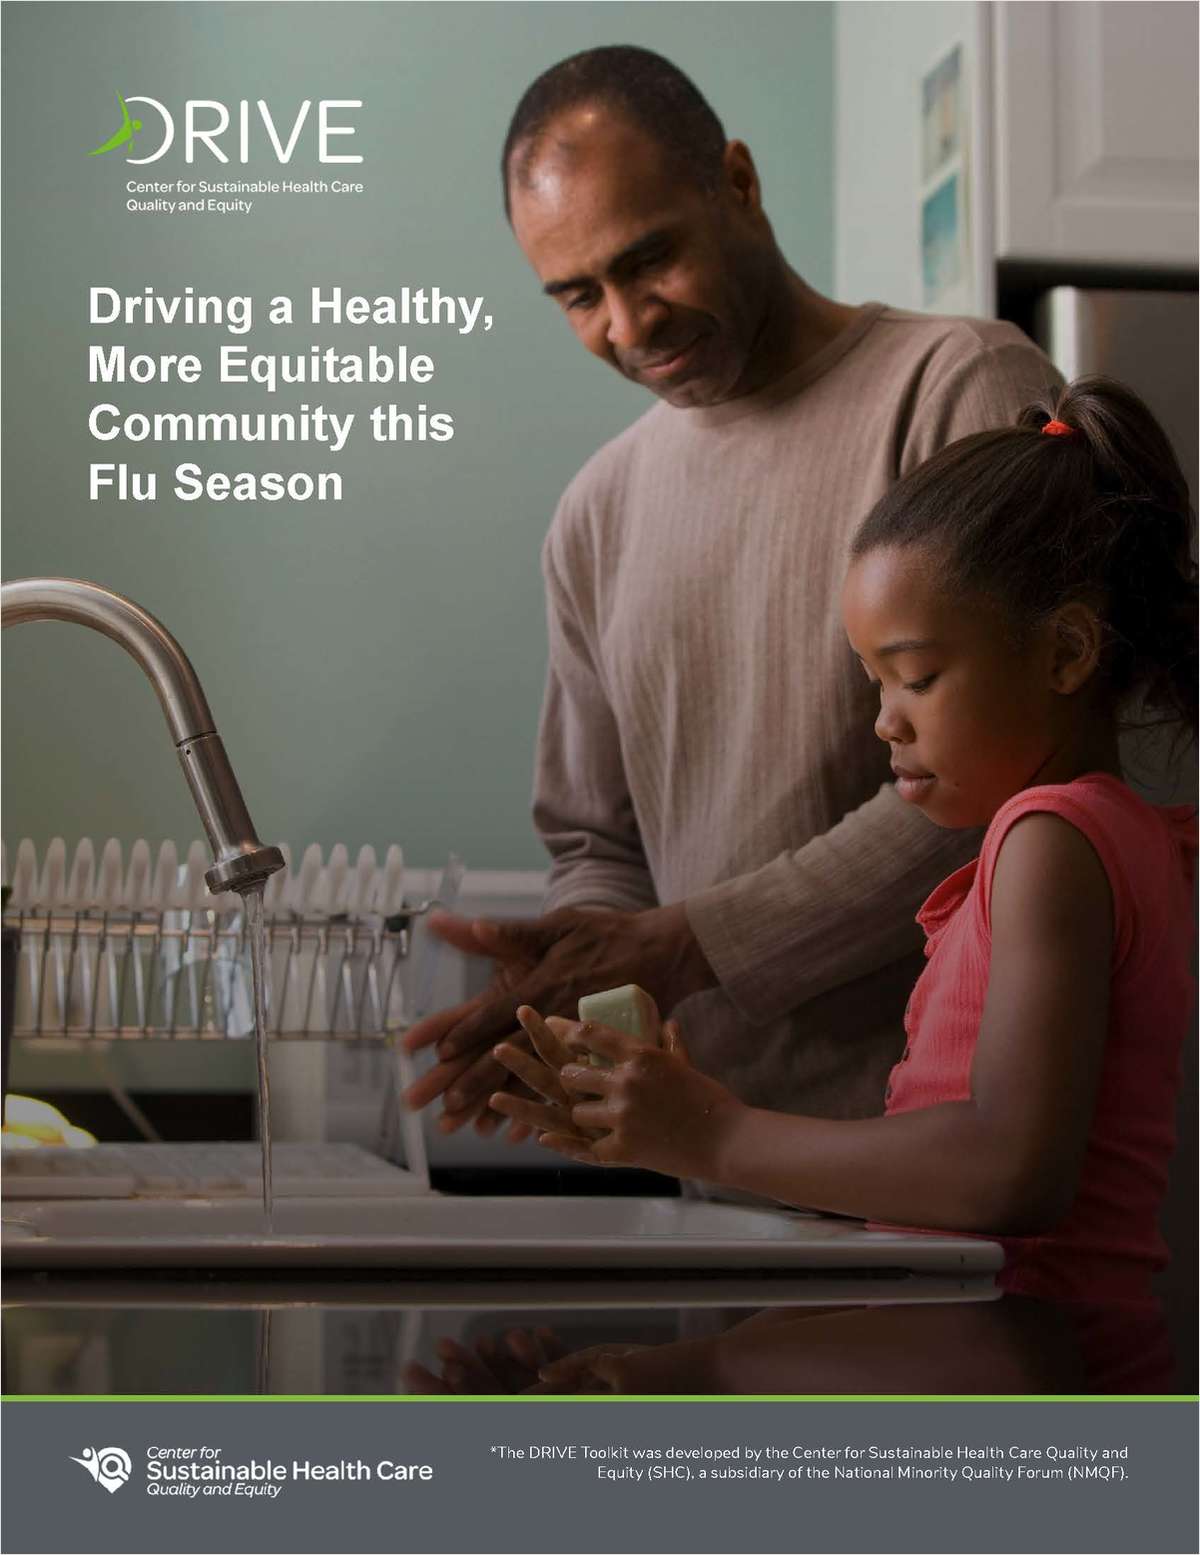 The SHC DRIVE Flu Vaccine Equity Toolkit - Driving a Healthy, More Equitable Community this Flu Season